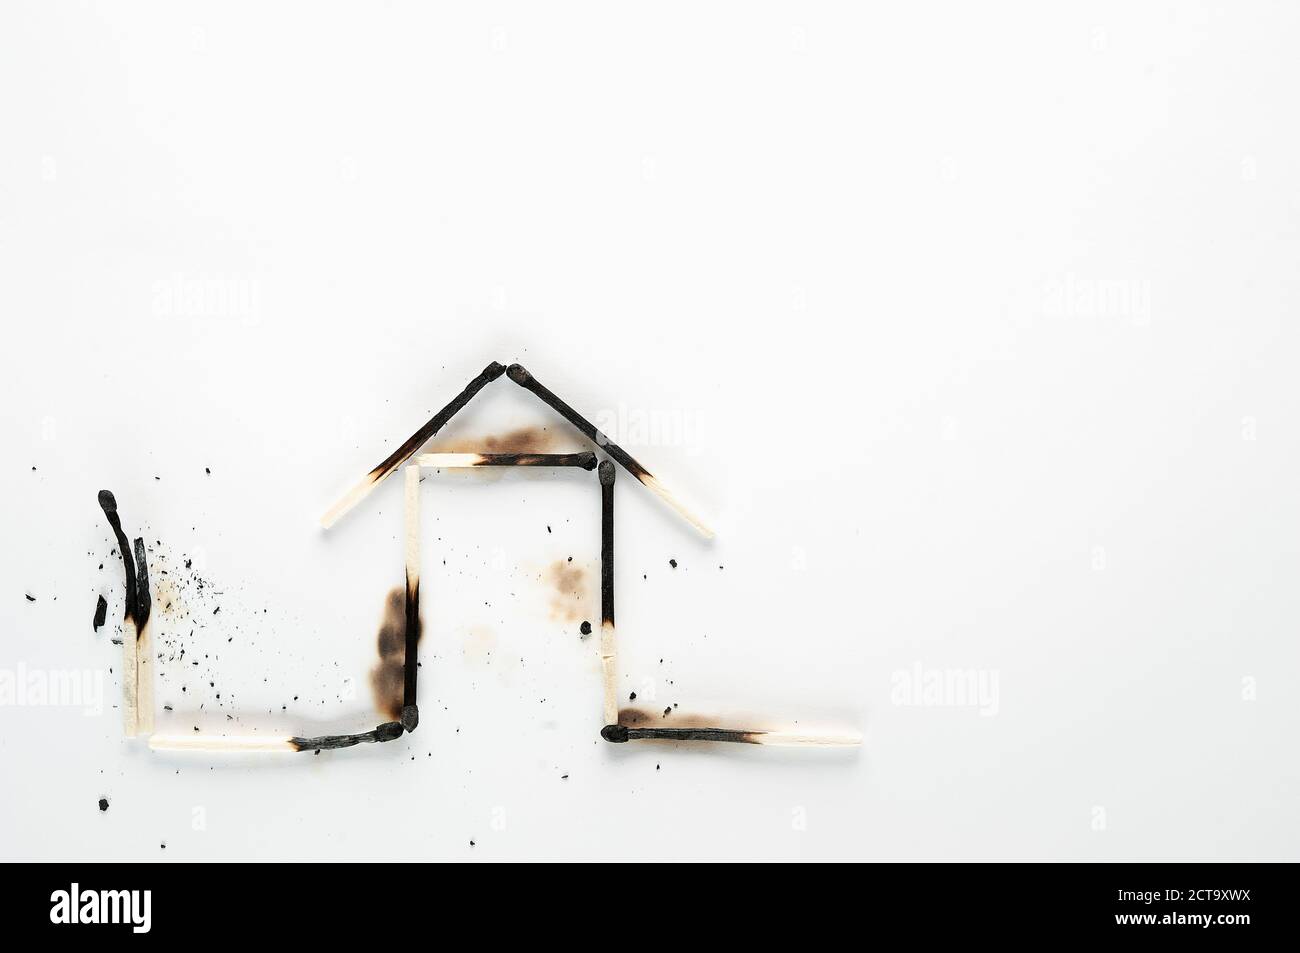 Burnt down matches shaped like a house Stock Photo